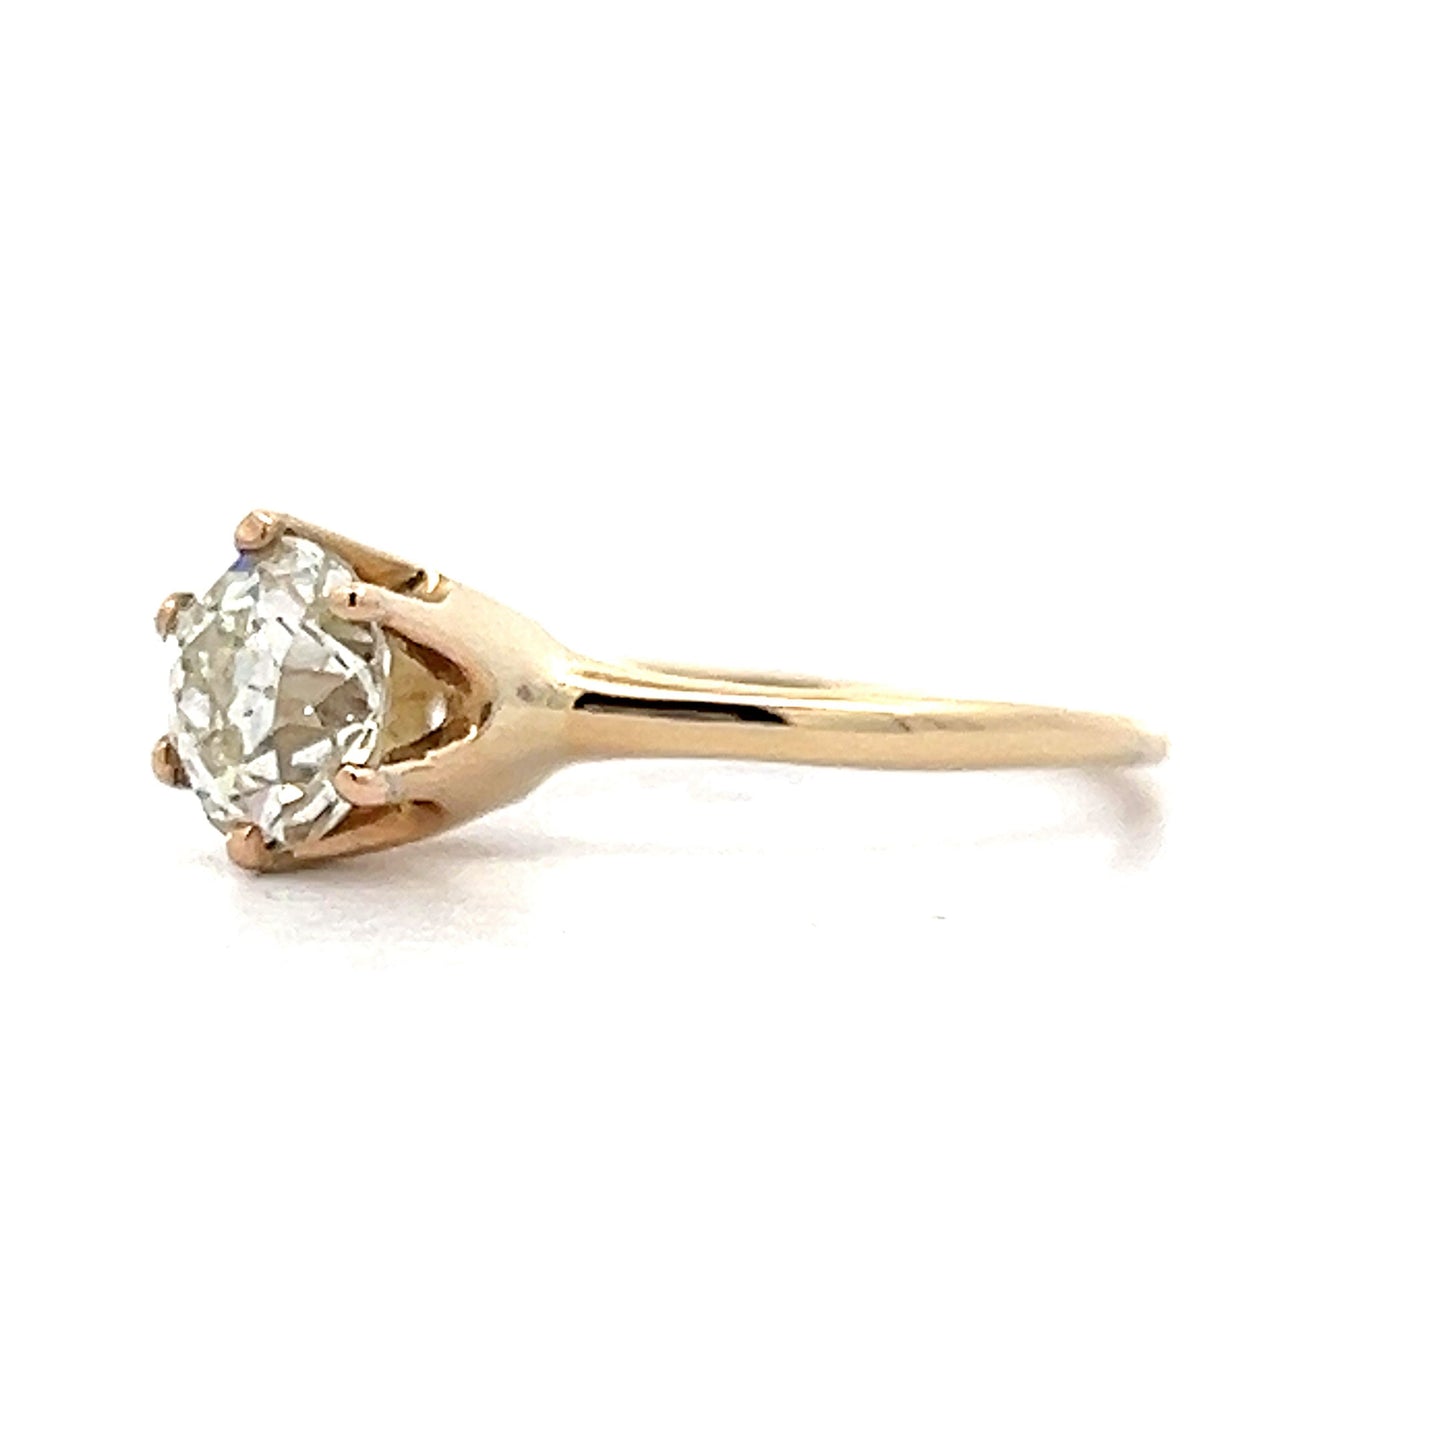 1.18 Old European Solitaire Engagement Ring in Yellow Gold